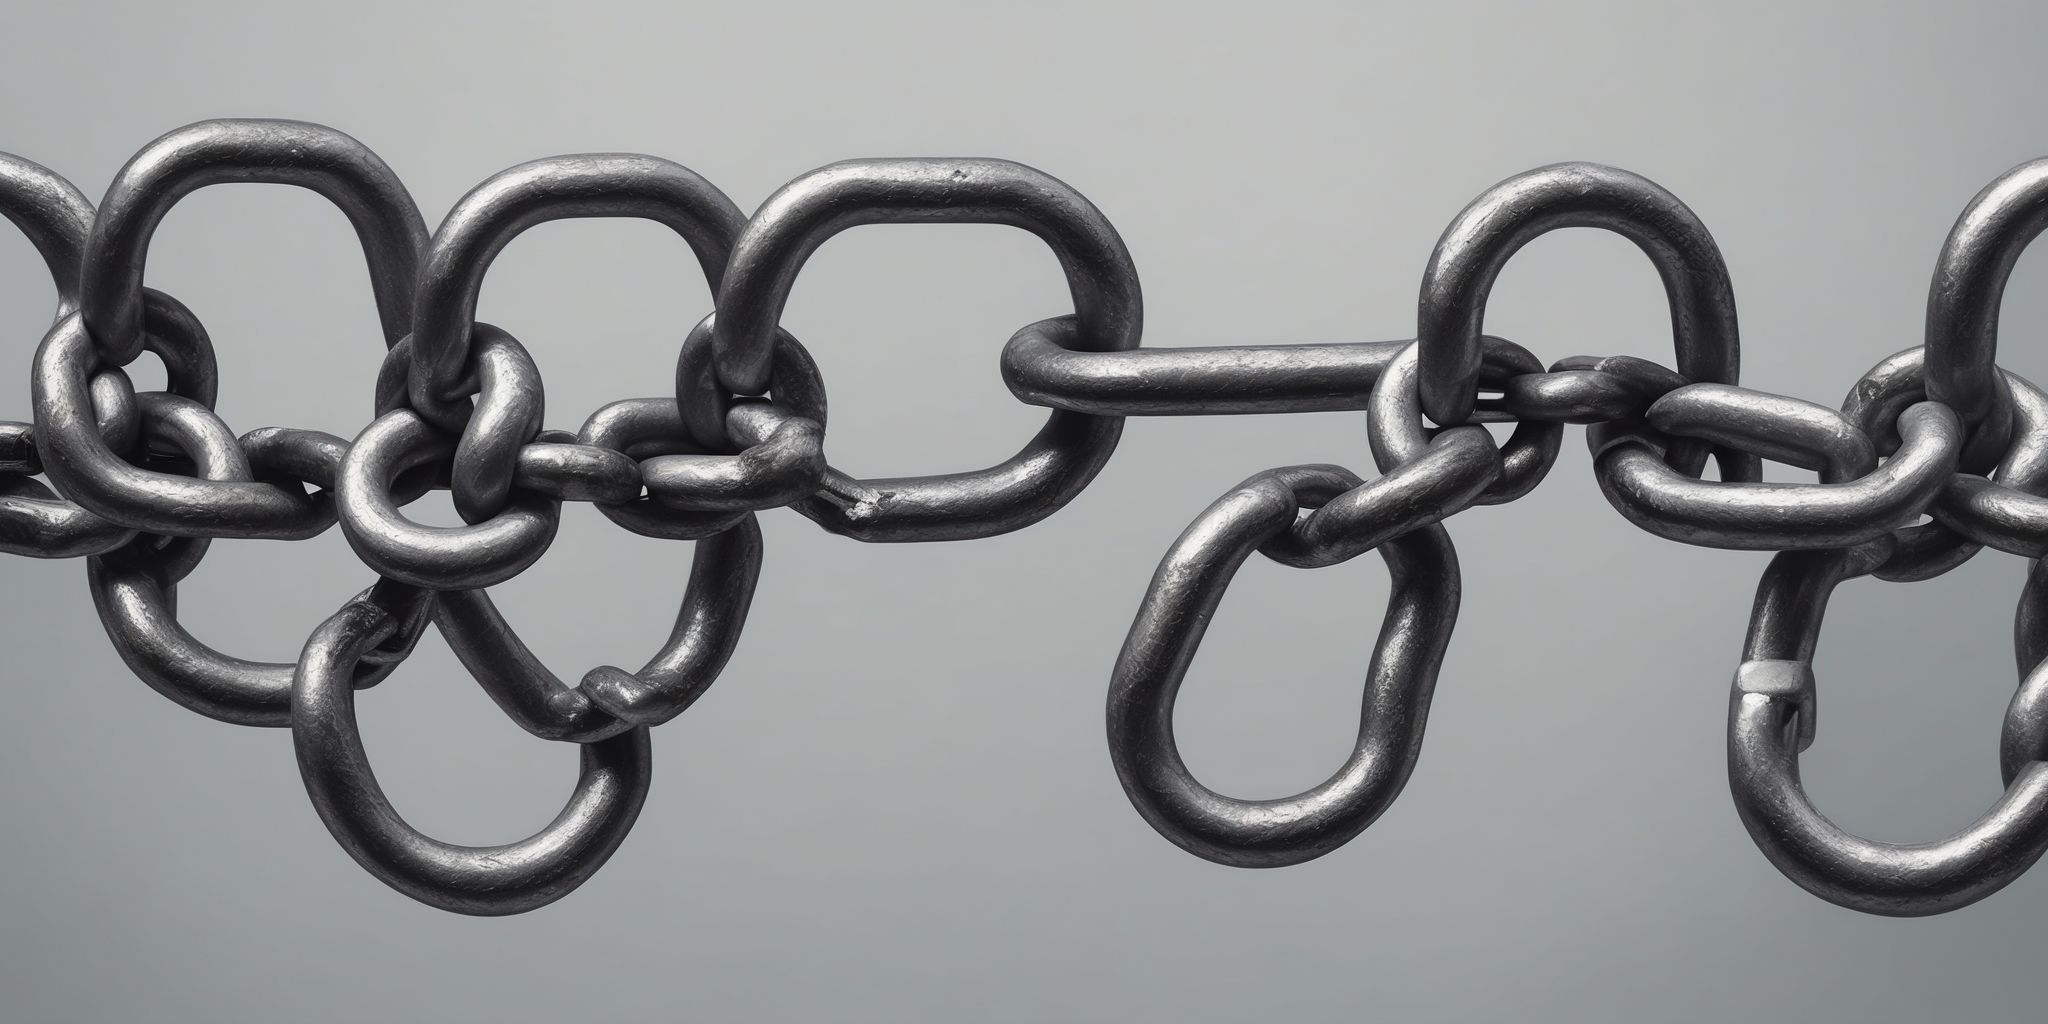 Chains  in realistic, photographic style